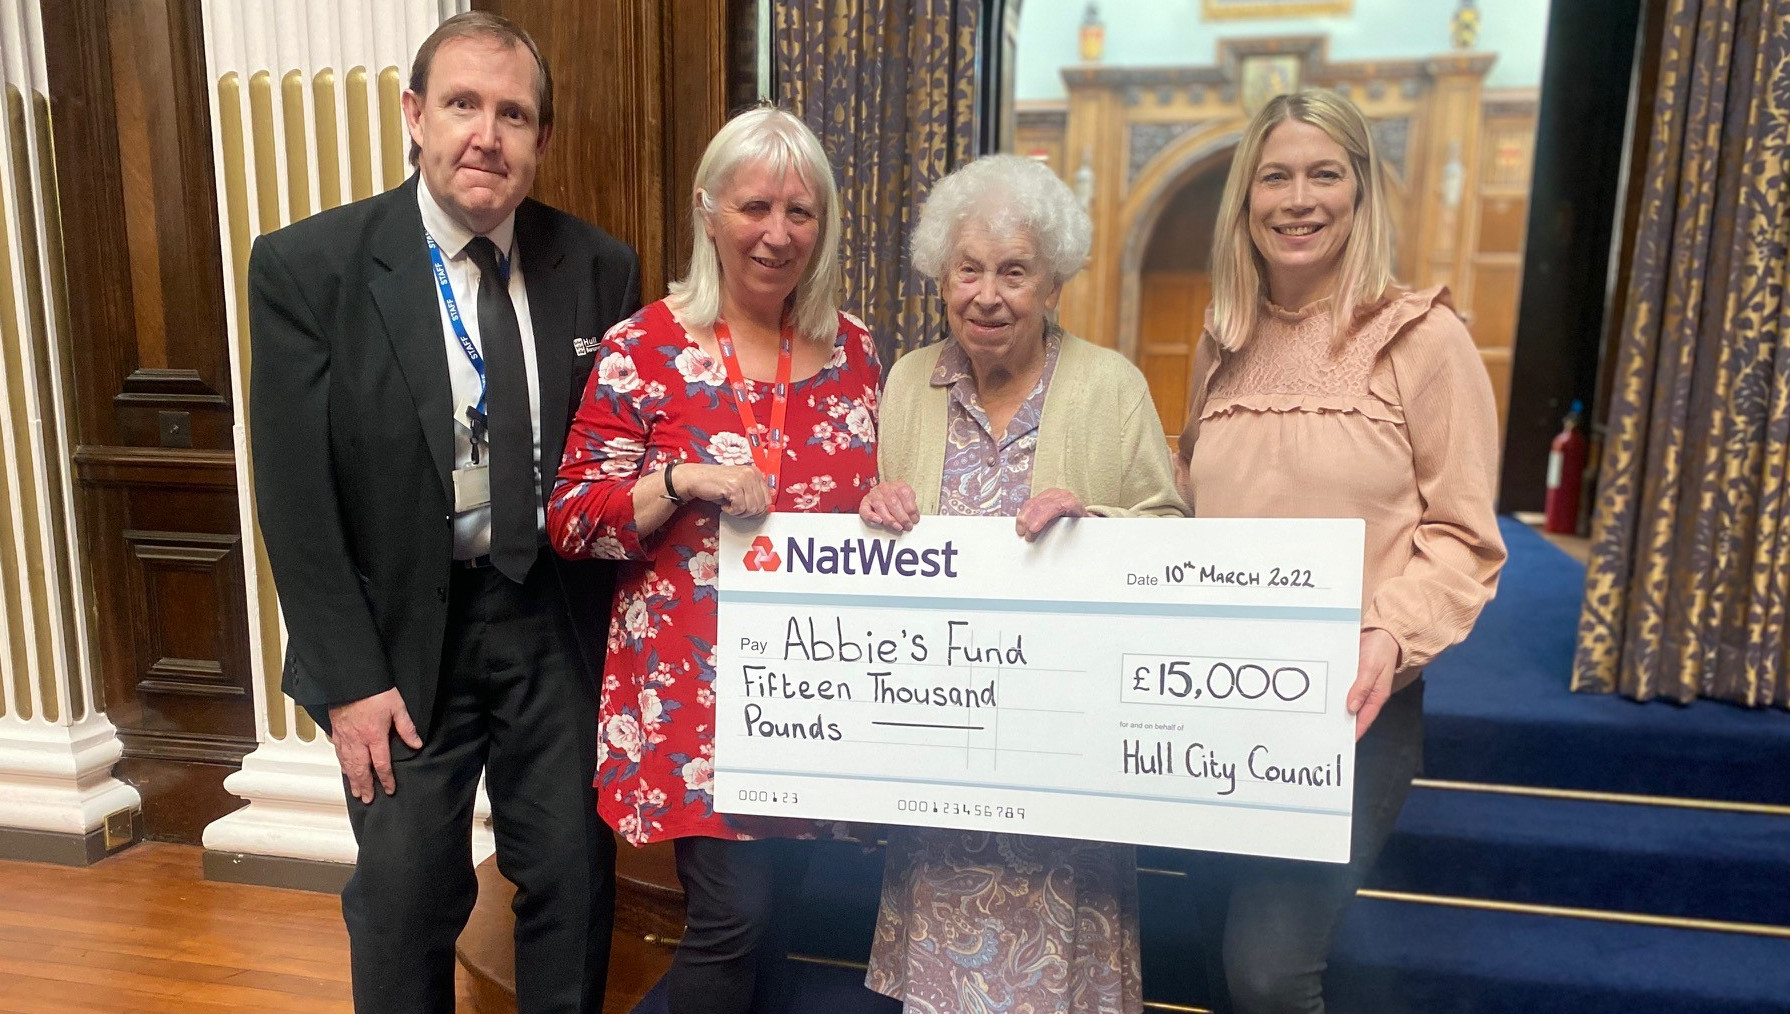 A cheque is presented to Abbie's Fund - (L-R) Richard Barker (Bereavement Services Manager), Cllr Rosie Nicola, Peggy Staveley (Cllr Nicola's mother), Katy Cowell.